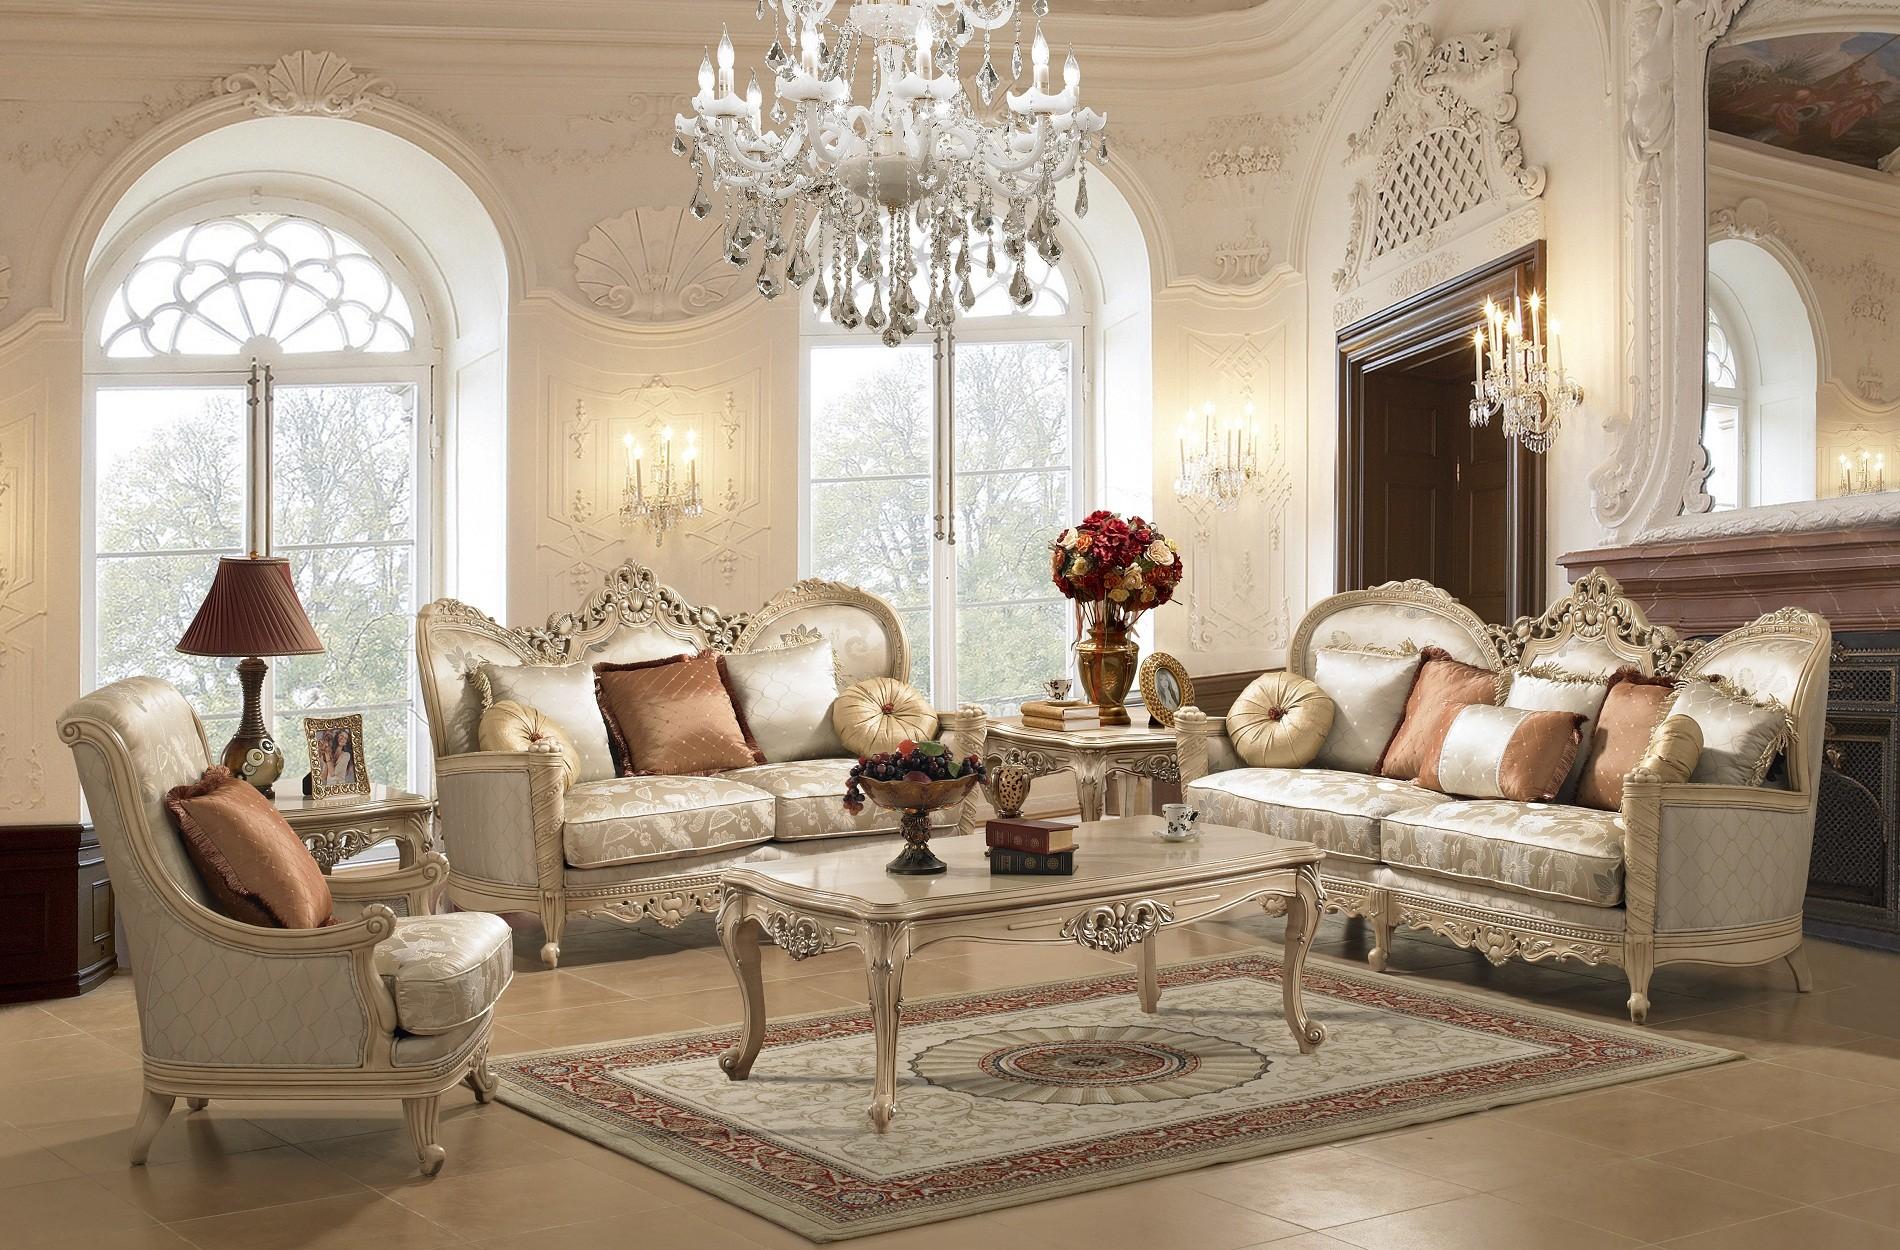 Antique Furniture: Adding Timeless Elegance To Your Decor